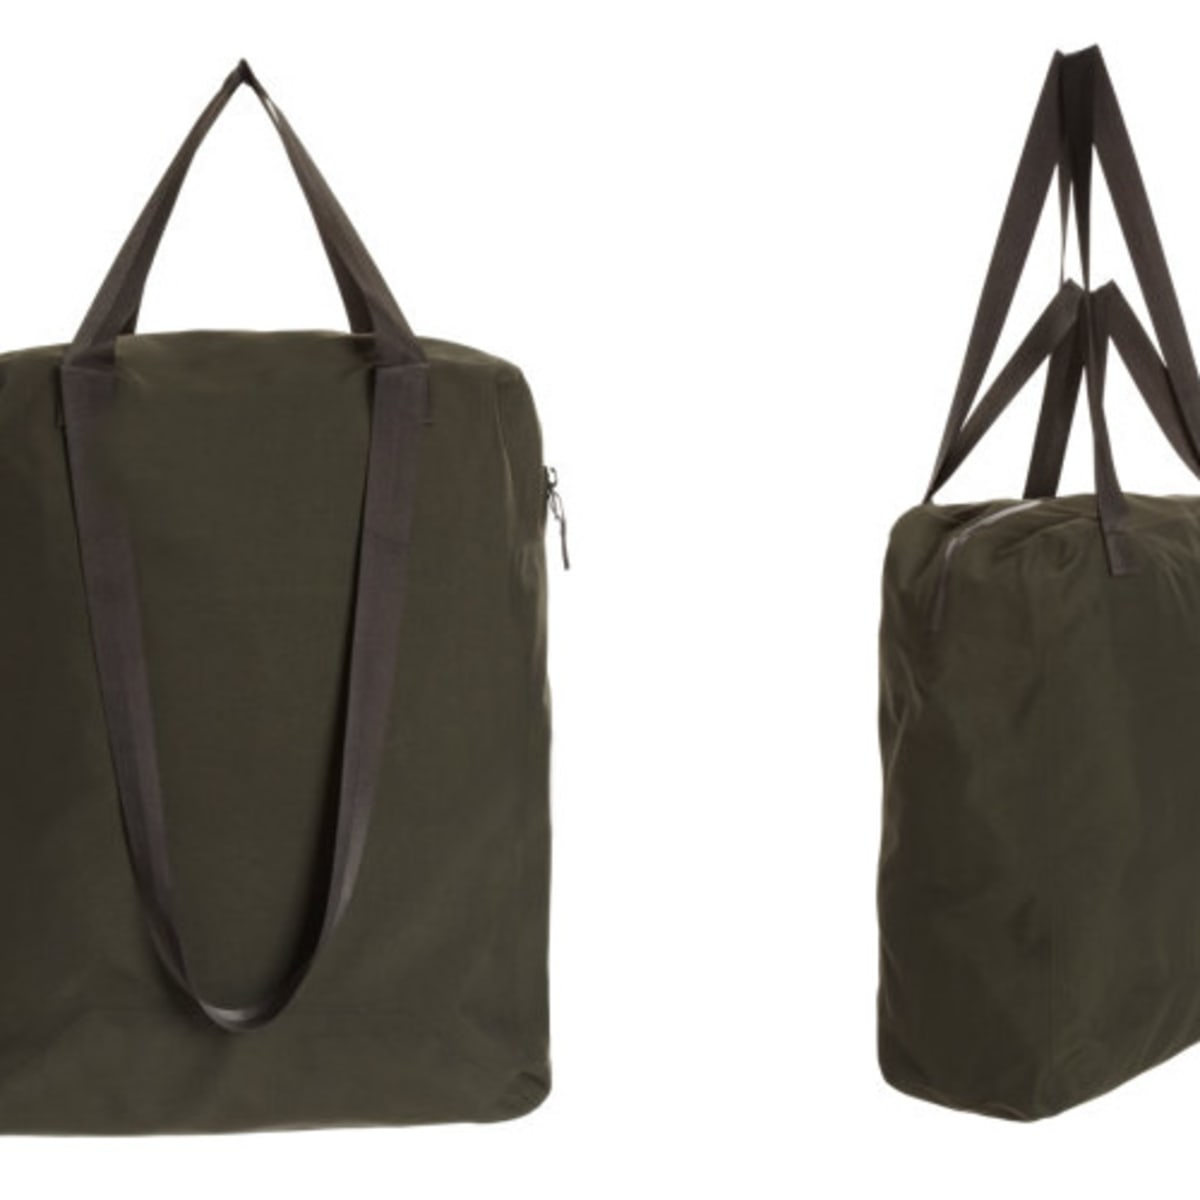 Veilance Green Seque Re-System Tote Bag